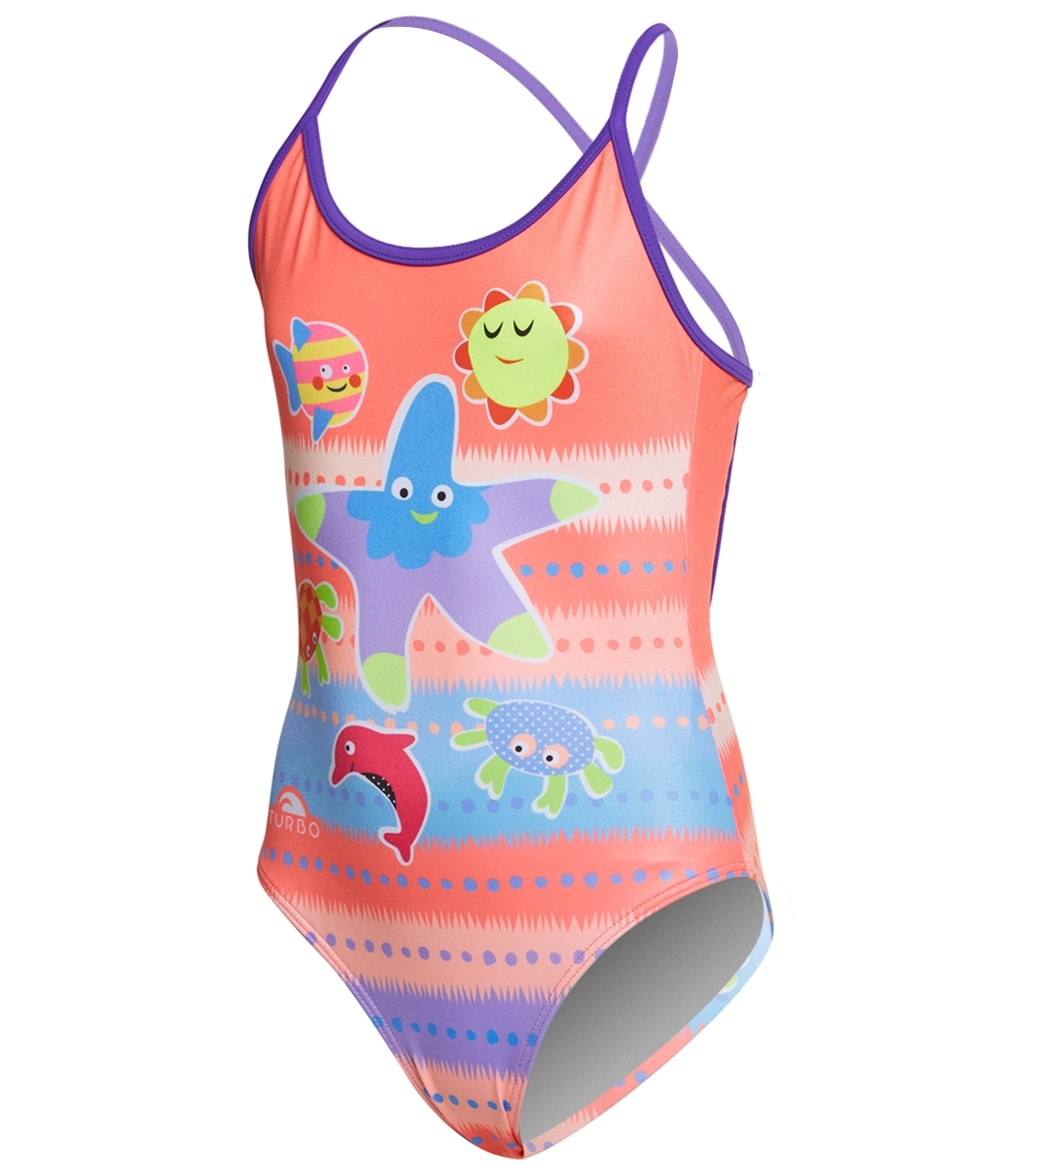 Turbo Girls' Underwater Sea Friends Swimsuit - Multi 12 Months Polyester/Pbt - Swimoutlet.com